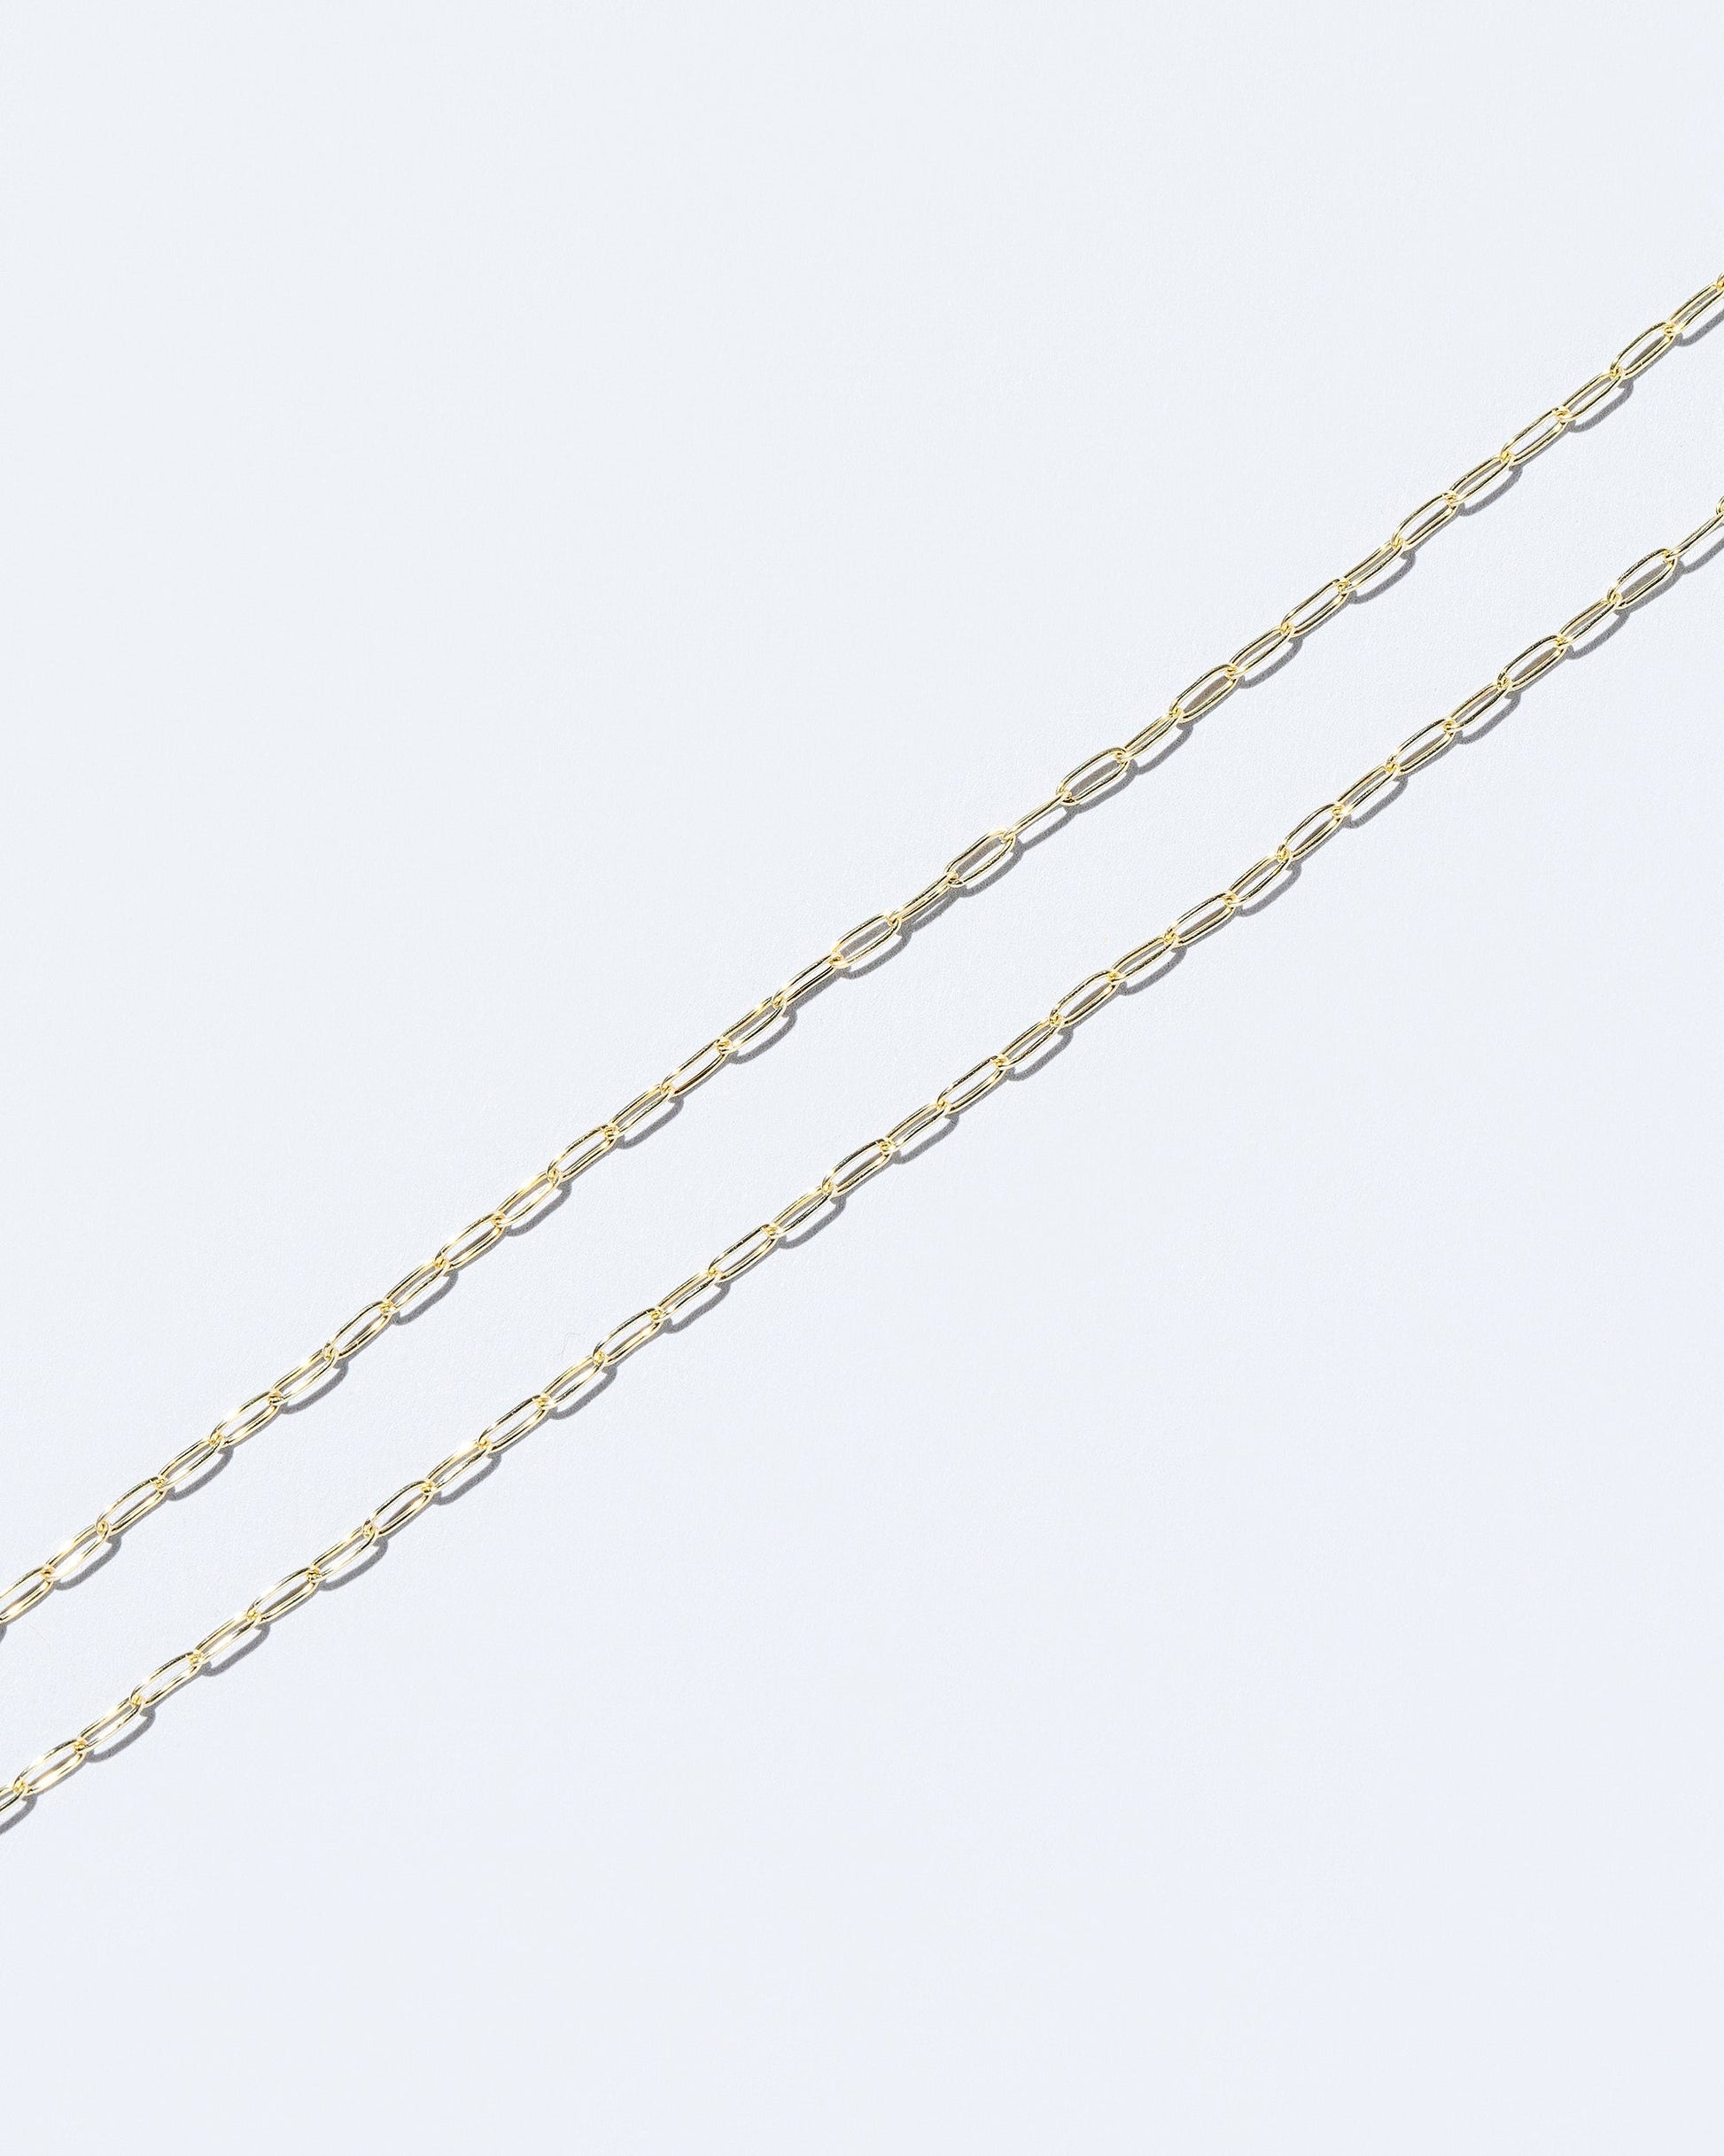  Oval Chain Necklace on light color background.